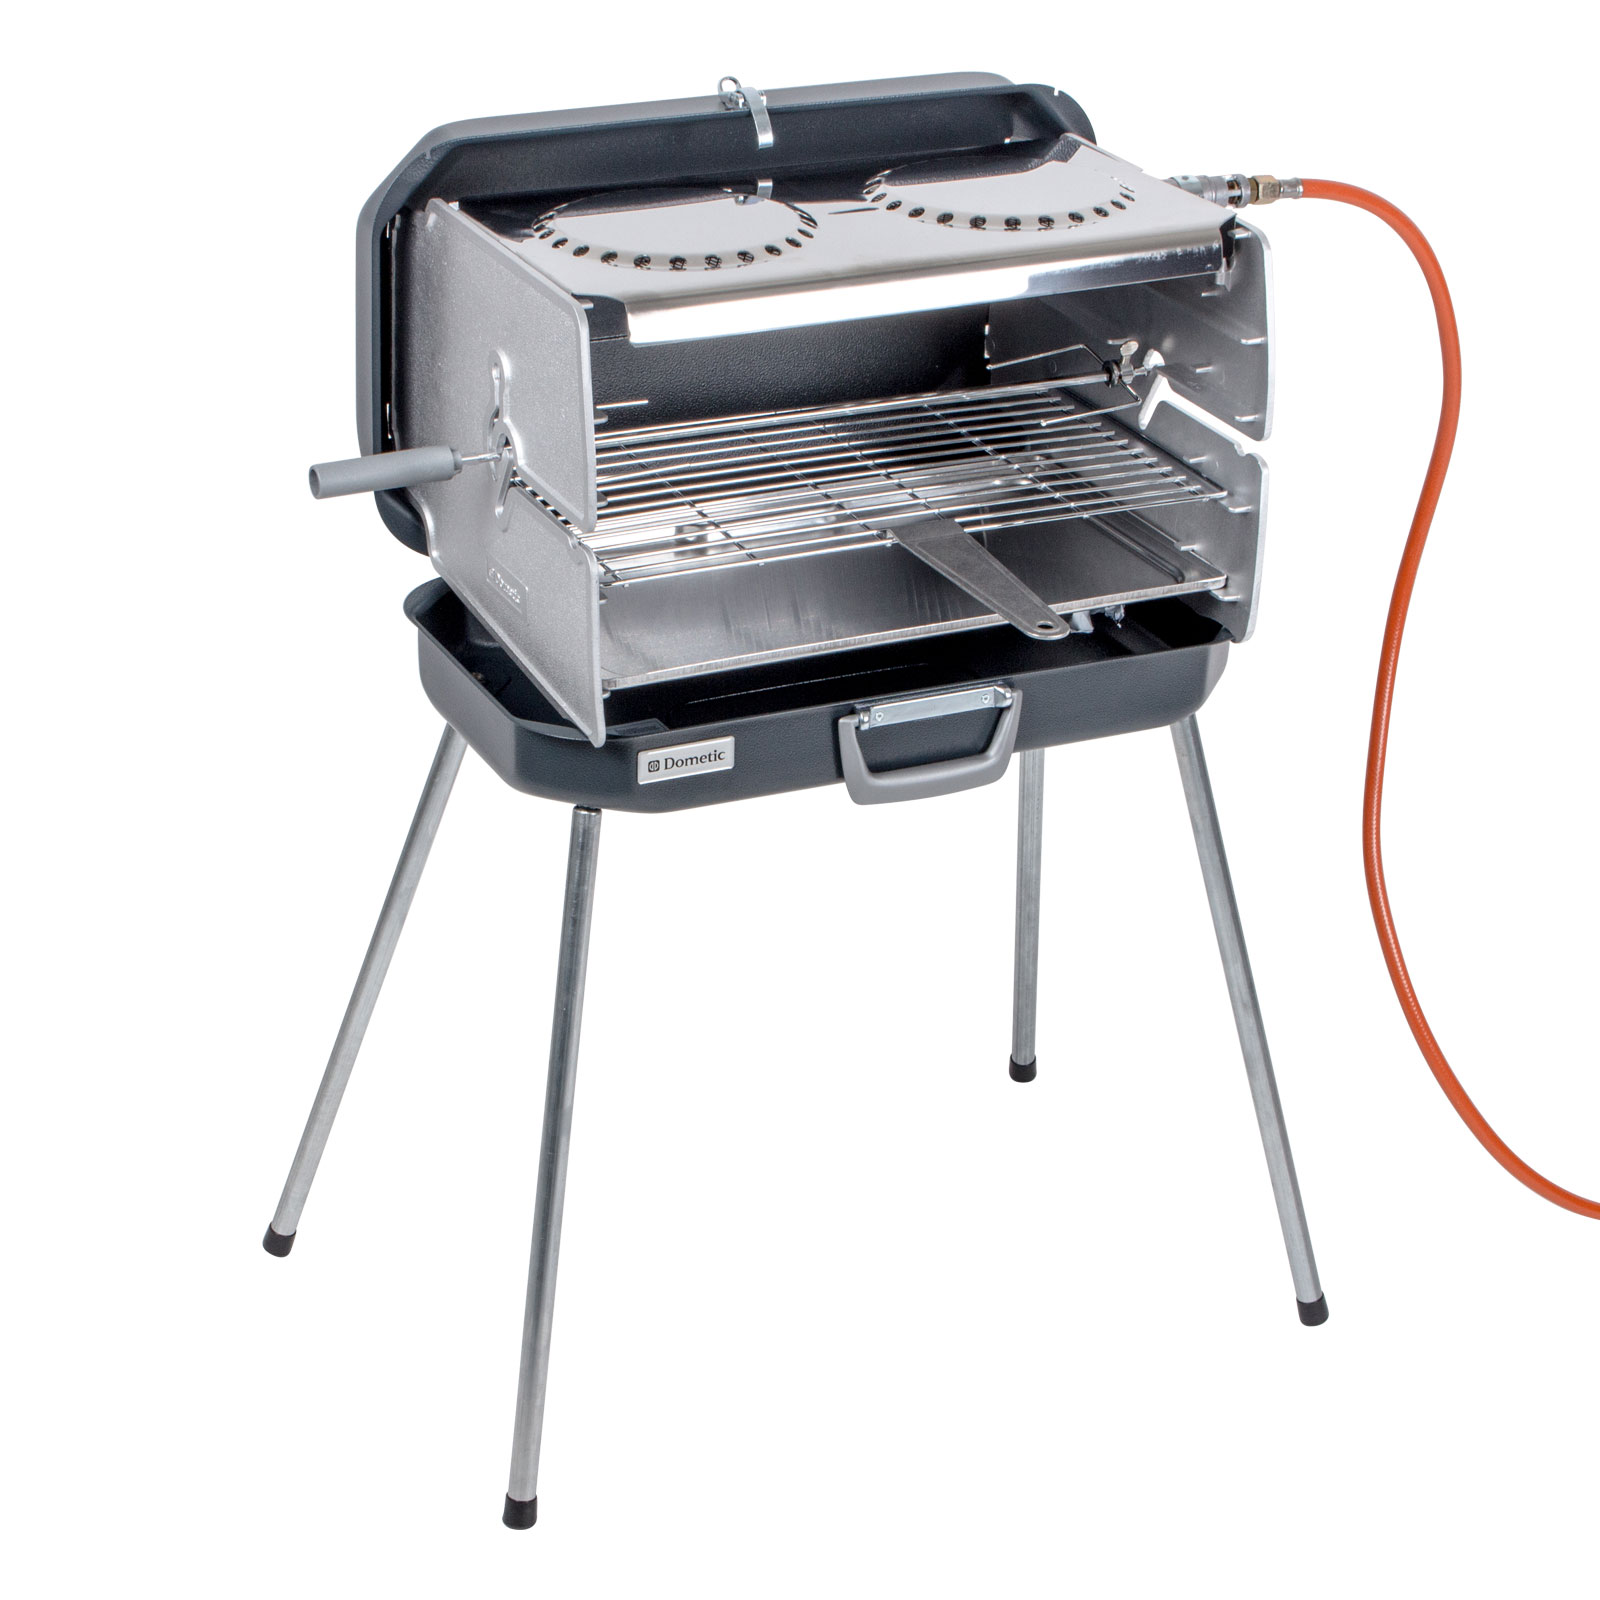 Dometic Koffer Gasgrill Classic 2, 30 mbar, 4,3 KW, Edelstahl, inkl Schlauch